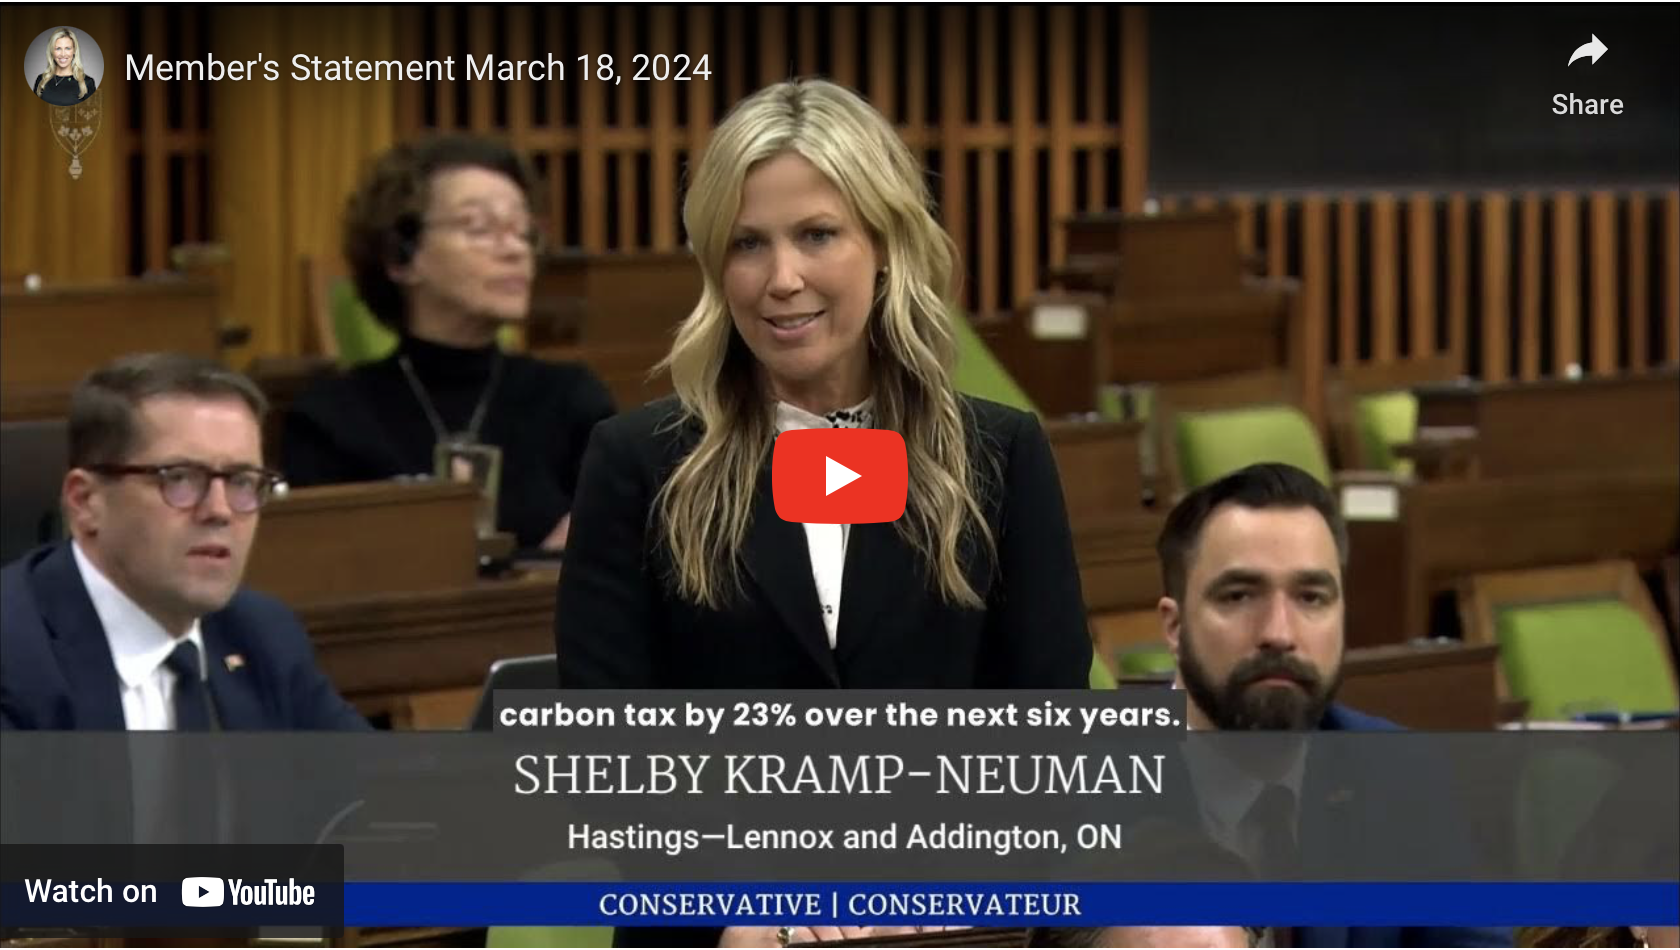 Shelby speaking in the House of Commons with a black jacket and white top.